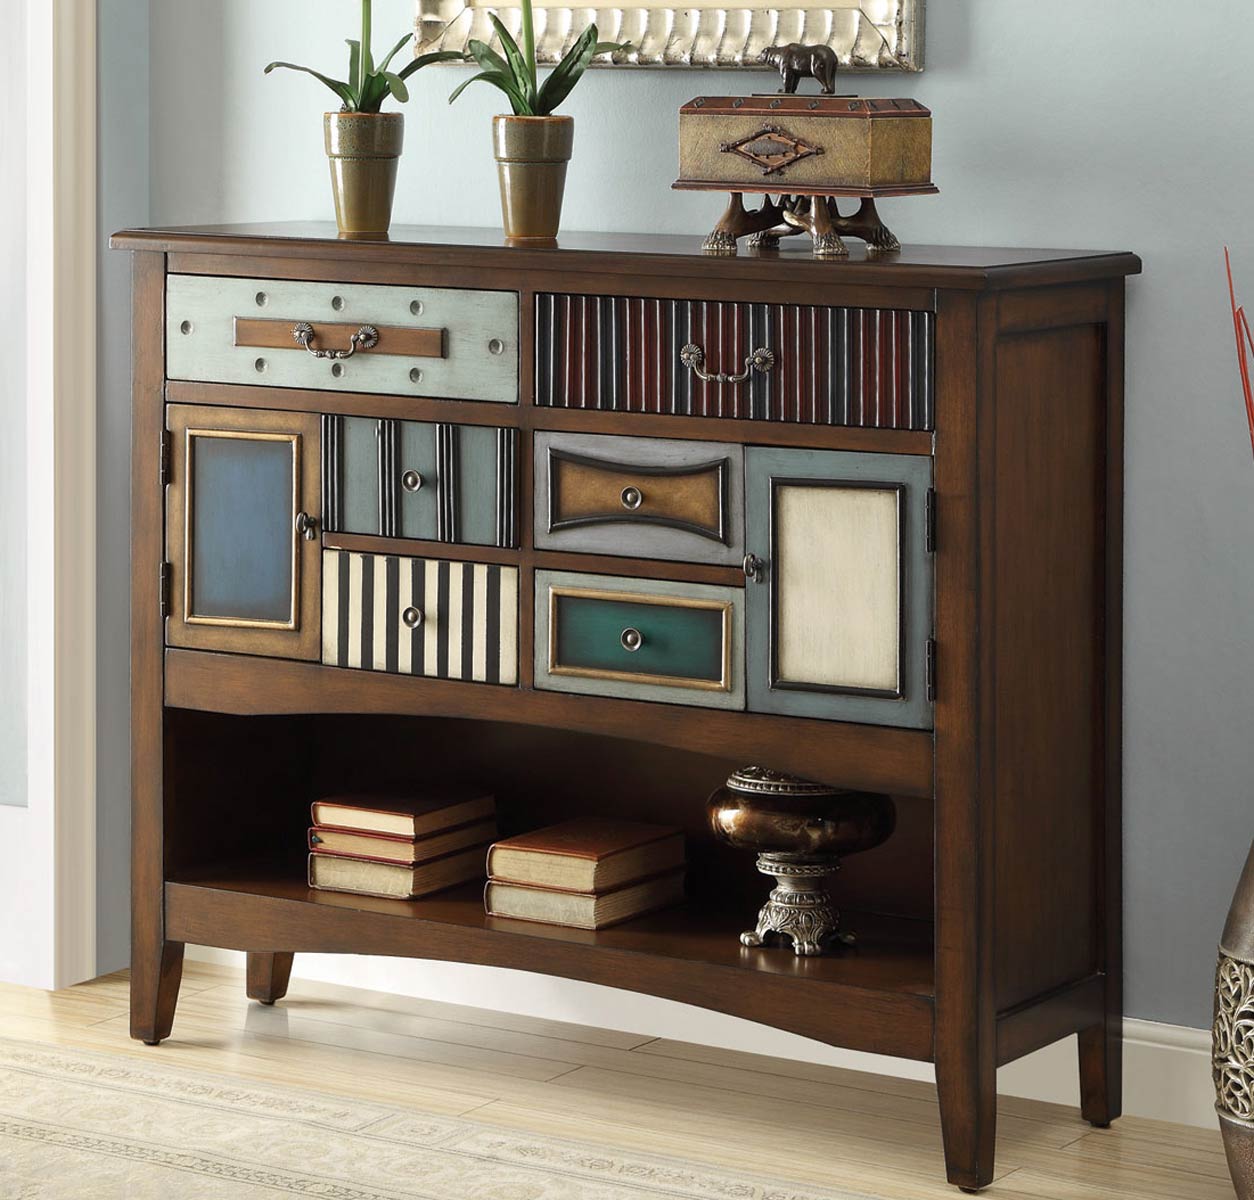 Coaster 950329 Accent Cabinet - Brown